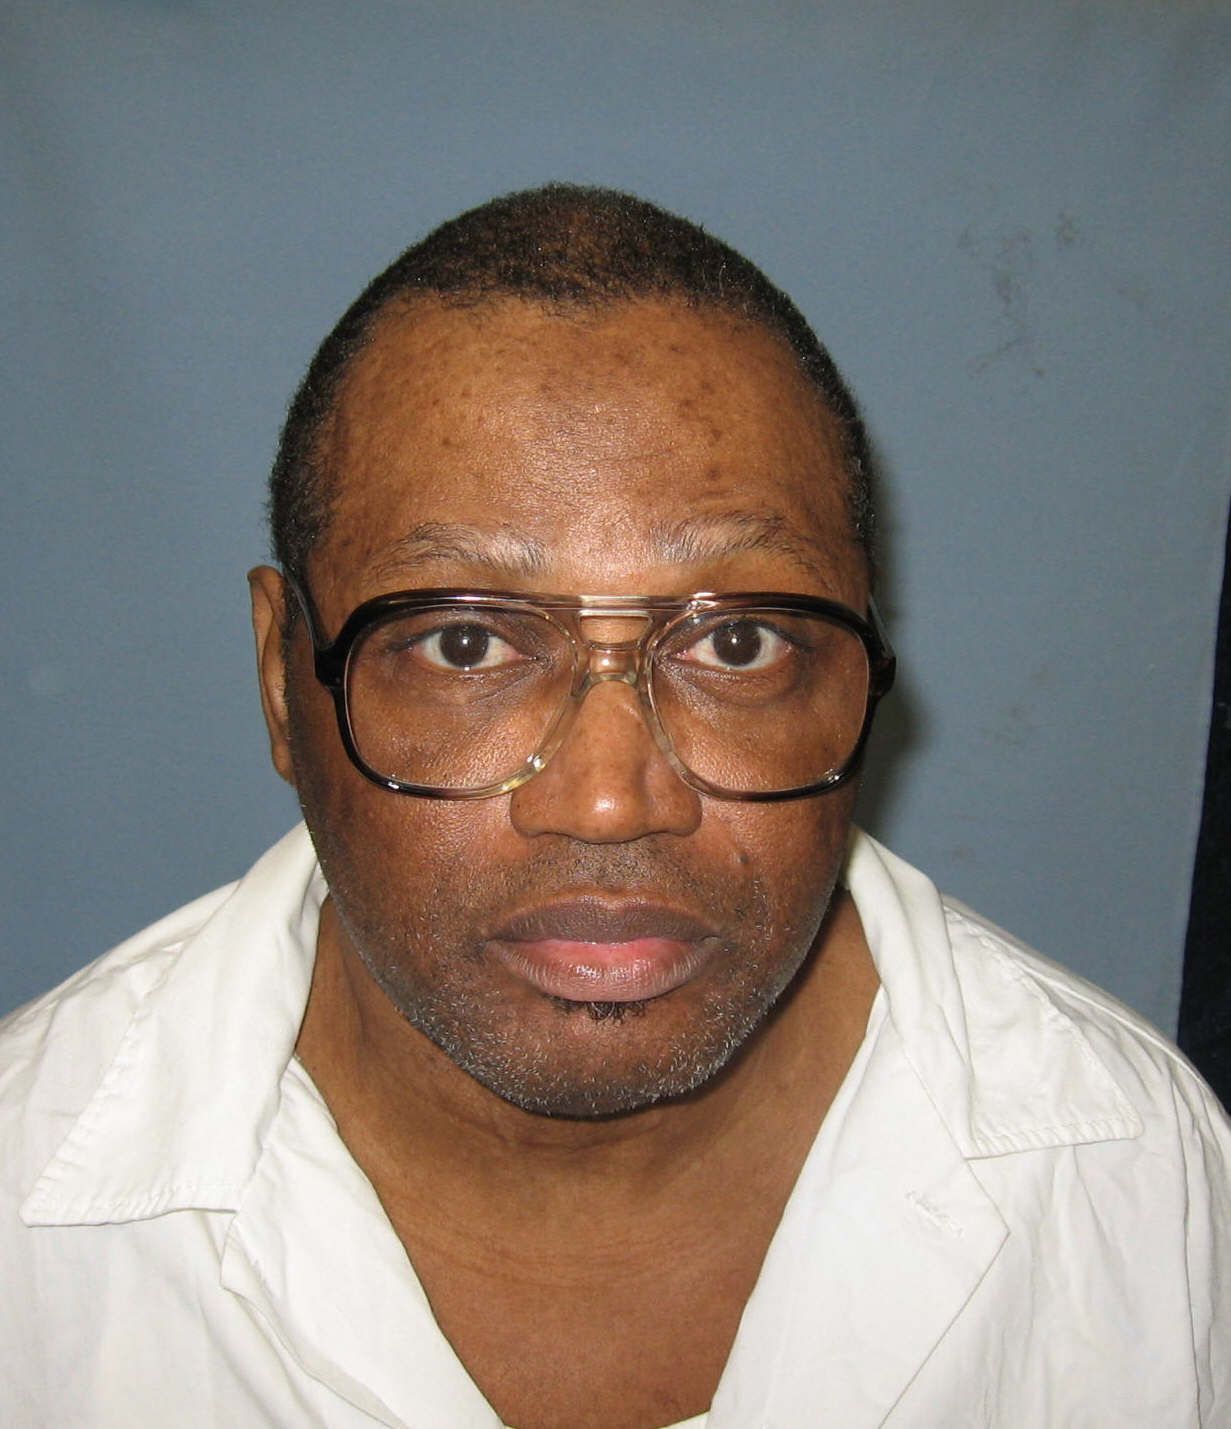 This undated file photo shows a police mug shot of Vernon Madison, whose execution was delayed Thursday so officials could review his incompetency claim.